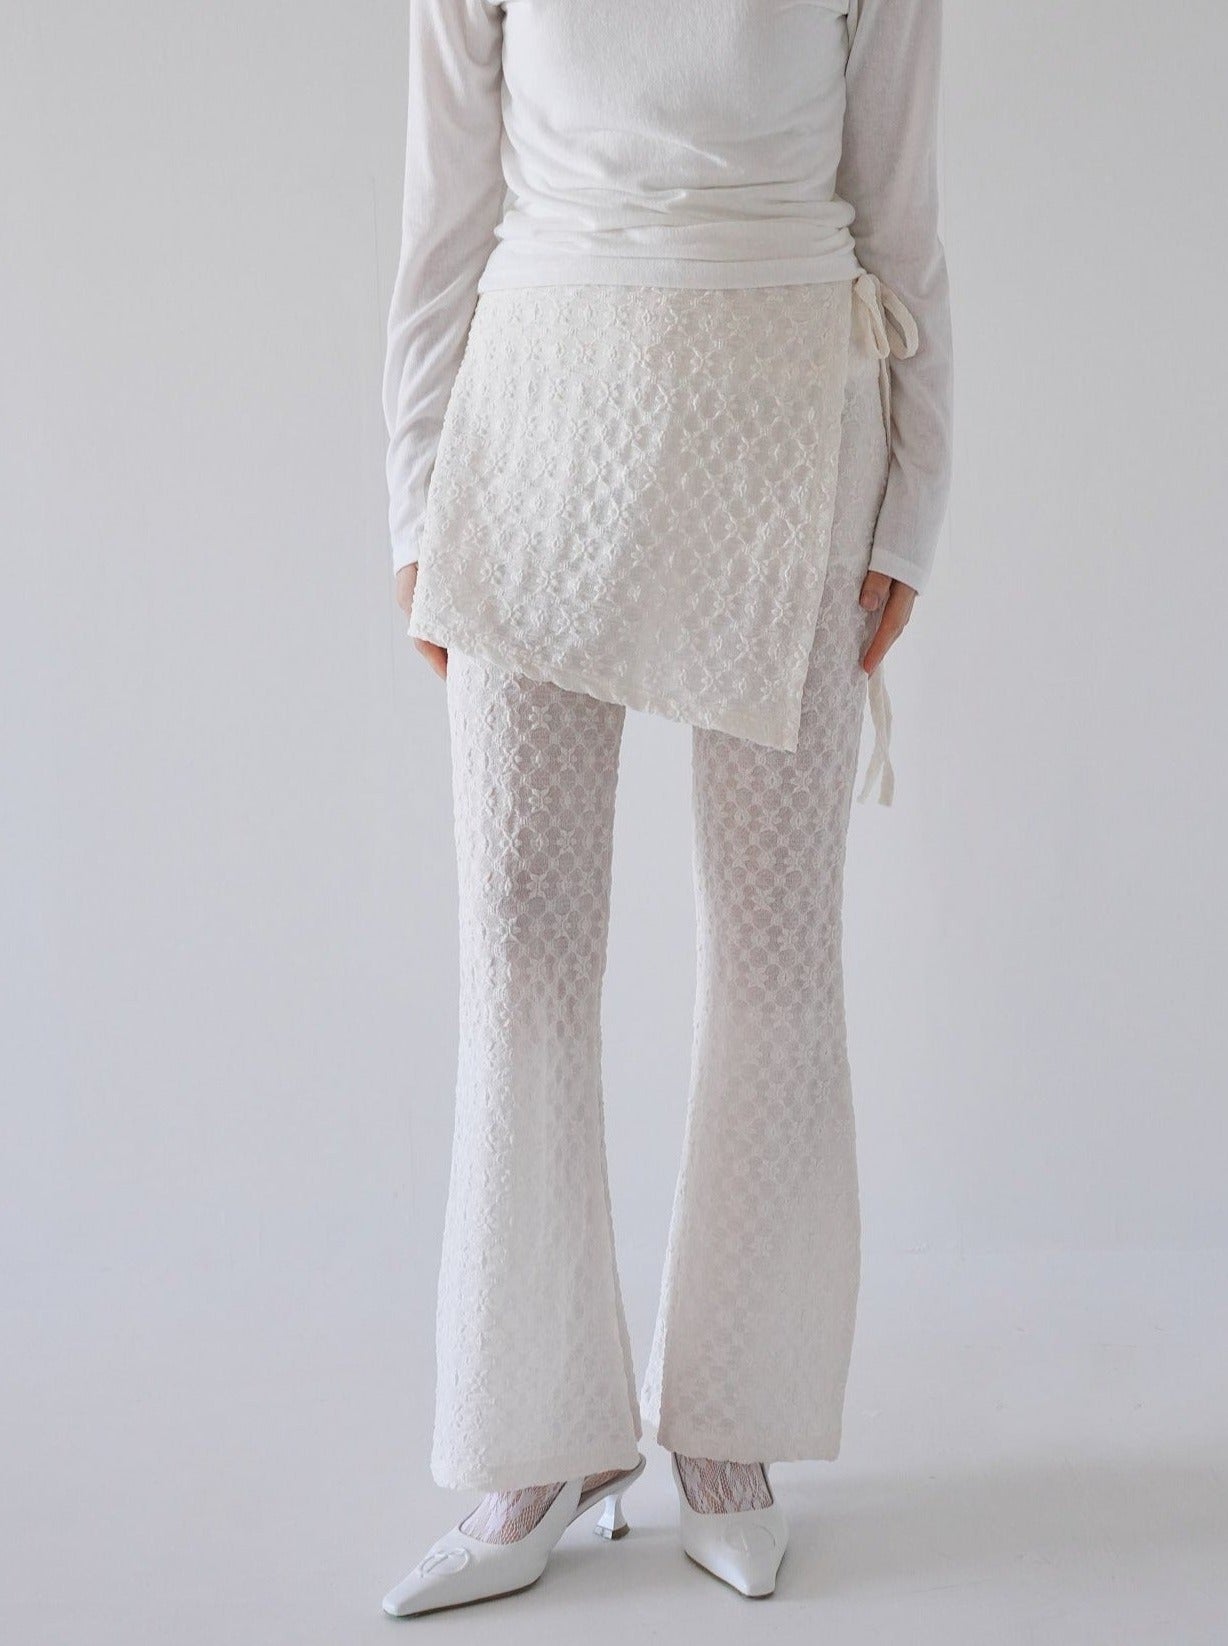 lace wrap skirt and pants